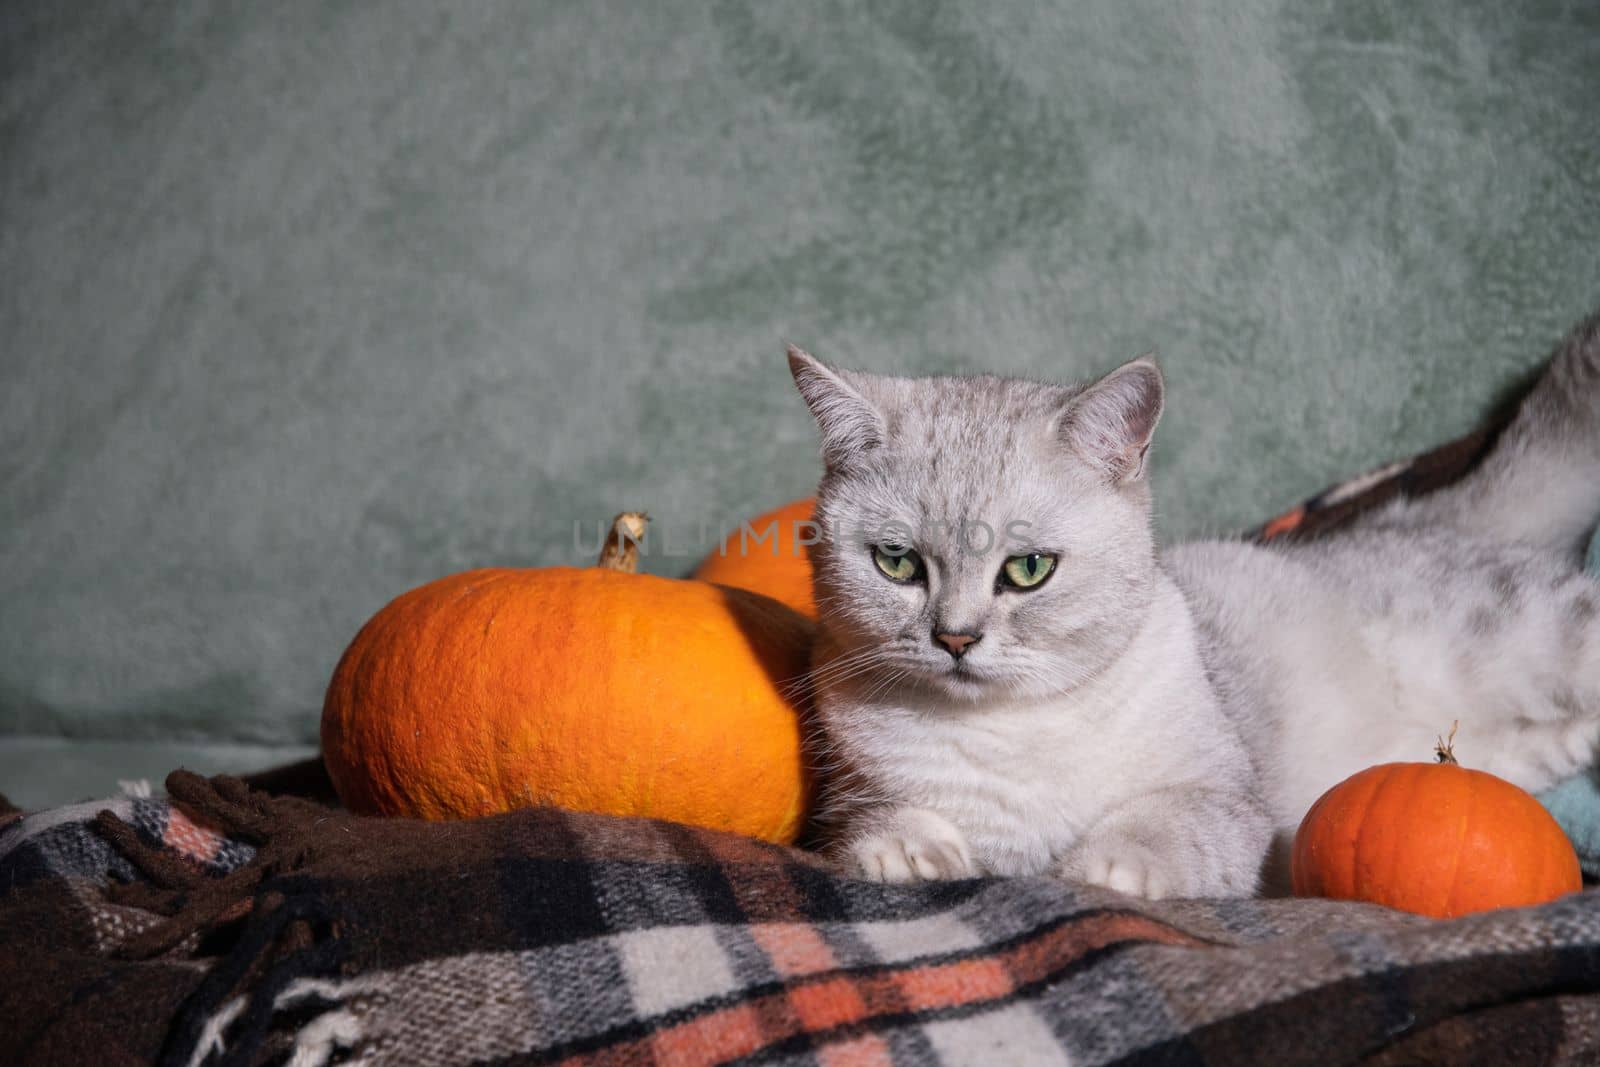 gray Scottish kitten on a plaid blanket on a sofa surrounded by orange pumpkins, cozy autumn room decor, Cat and pumpkins. High quality photo